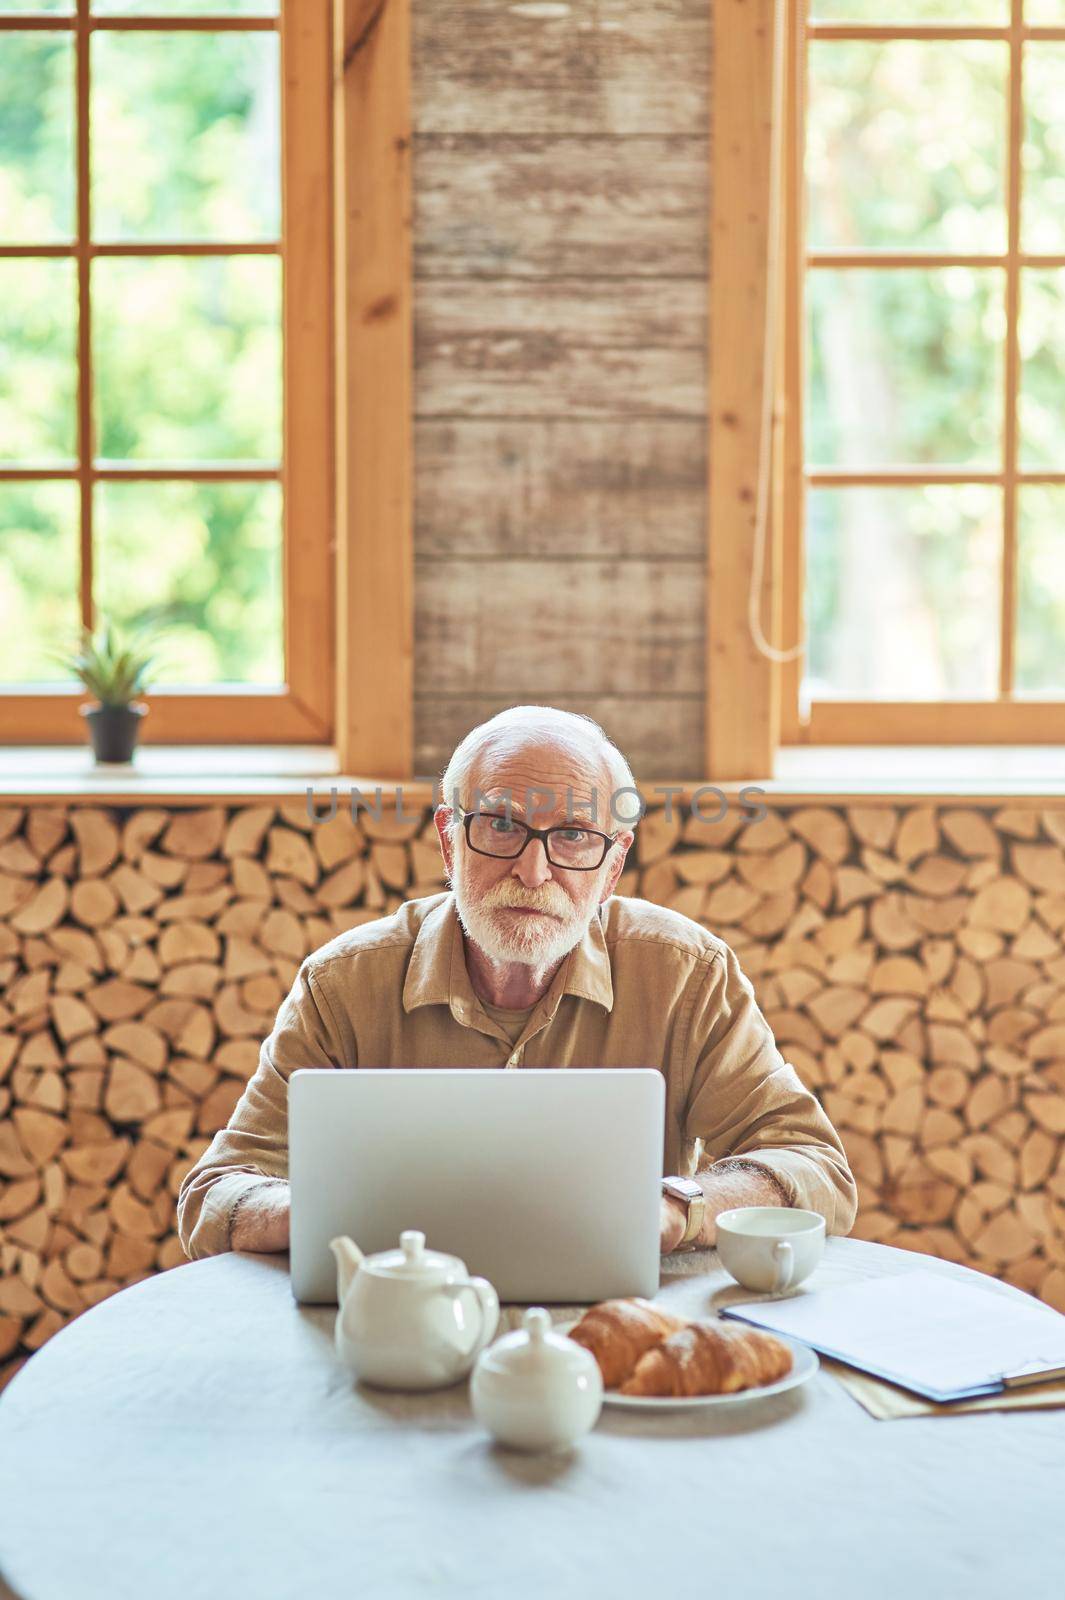 Serious elderly man sitting in room at home while using laptop and having breakfast. Lifestyle concept